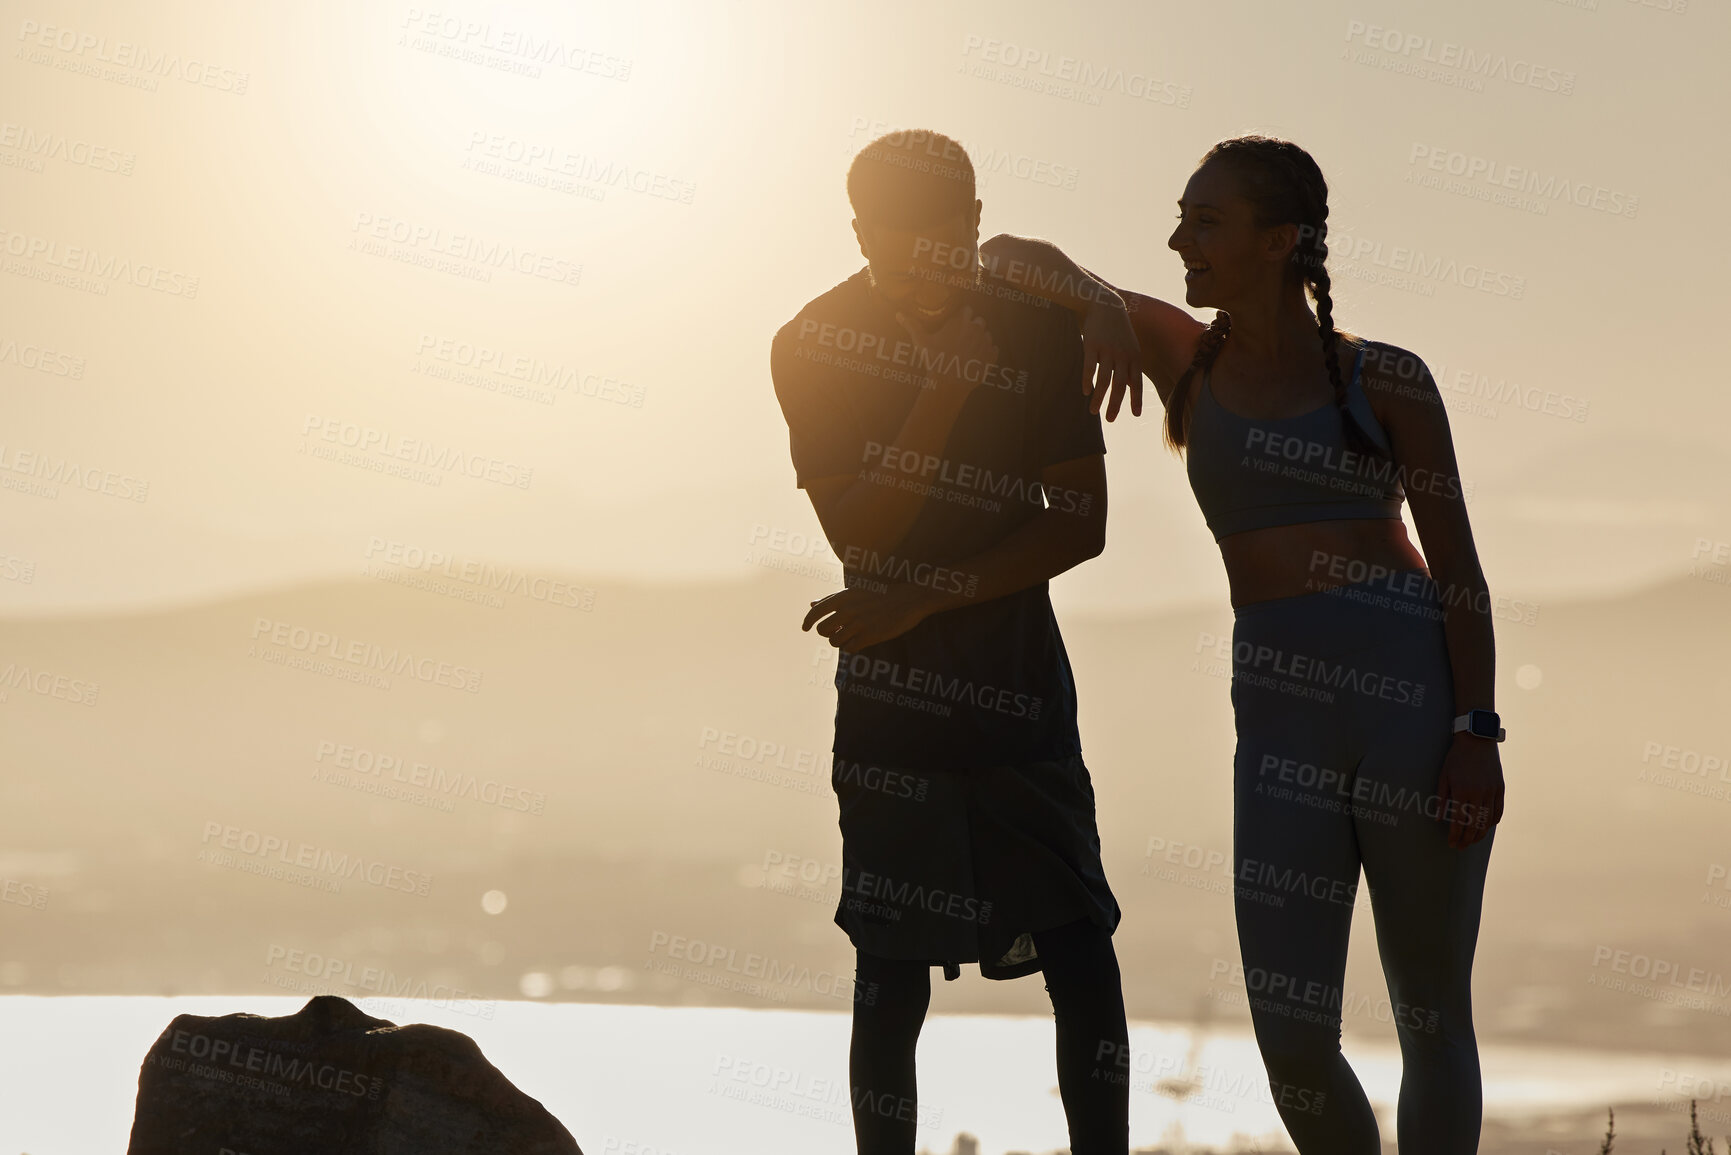 Buy stock photo Fitness, silhouette and couple talking in nature on break after workout outdoors. Sunset, happy man and woman discussing goals, training or target together after running or exercising for wellness.